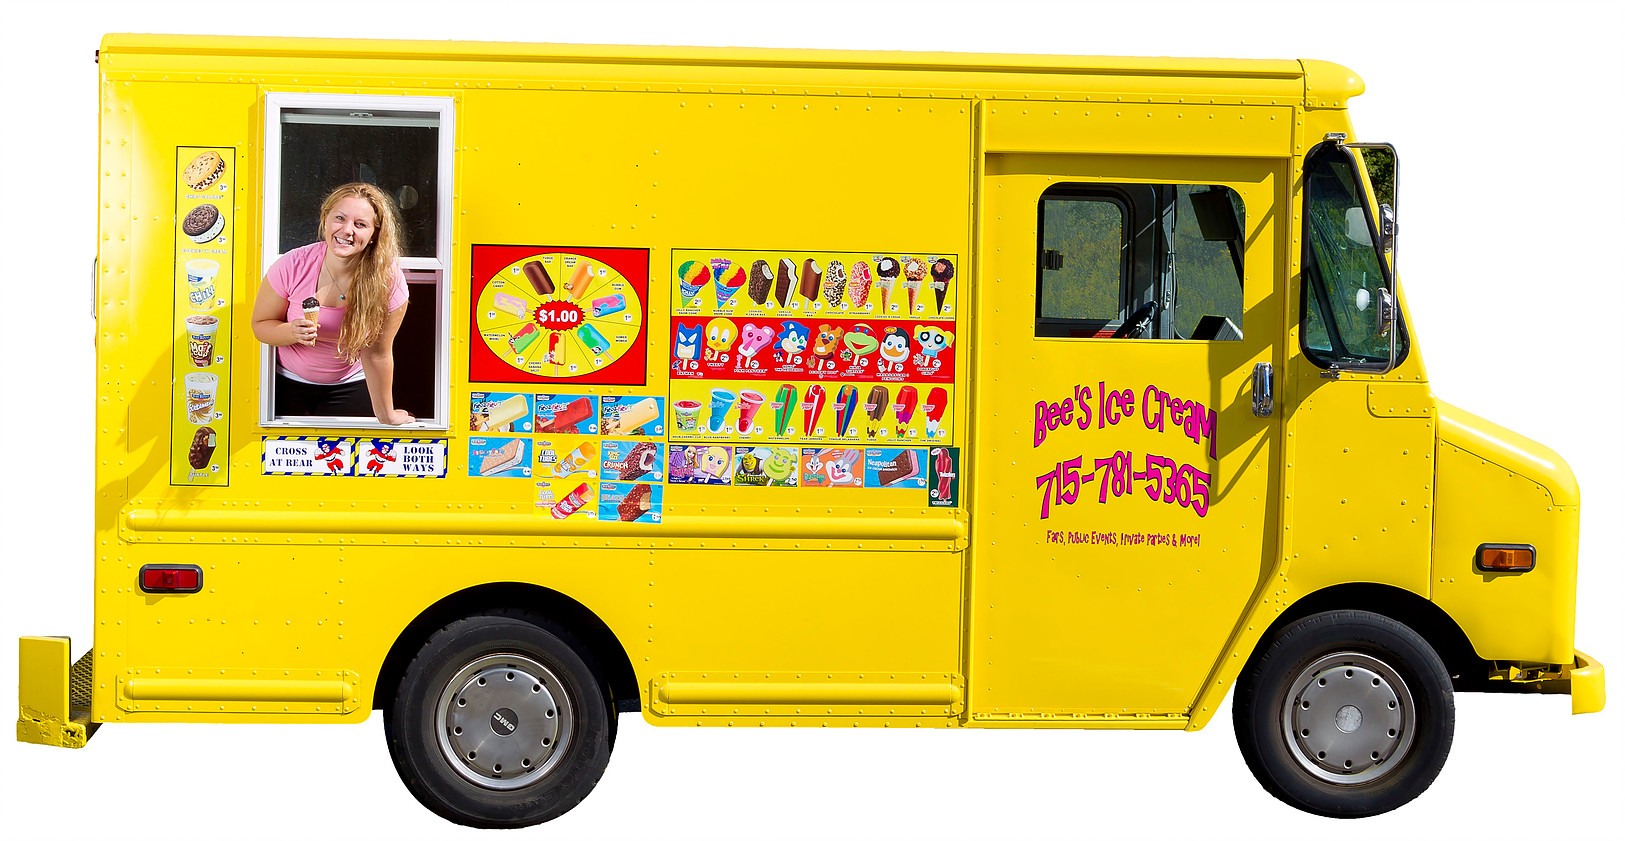 17-year-old girl with blonde hair and a pink shirt, holding an ice cream cone out the window of a yellow ice cream truck.